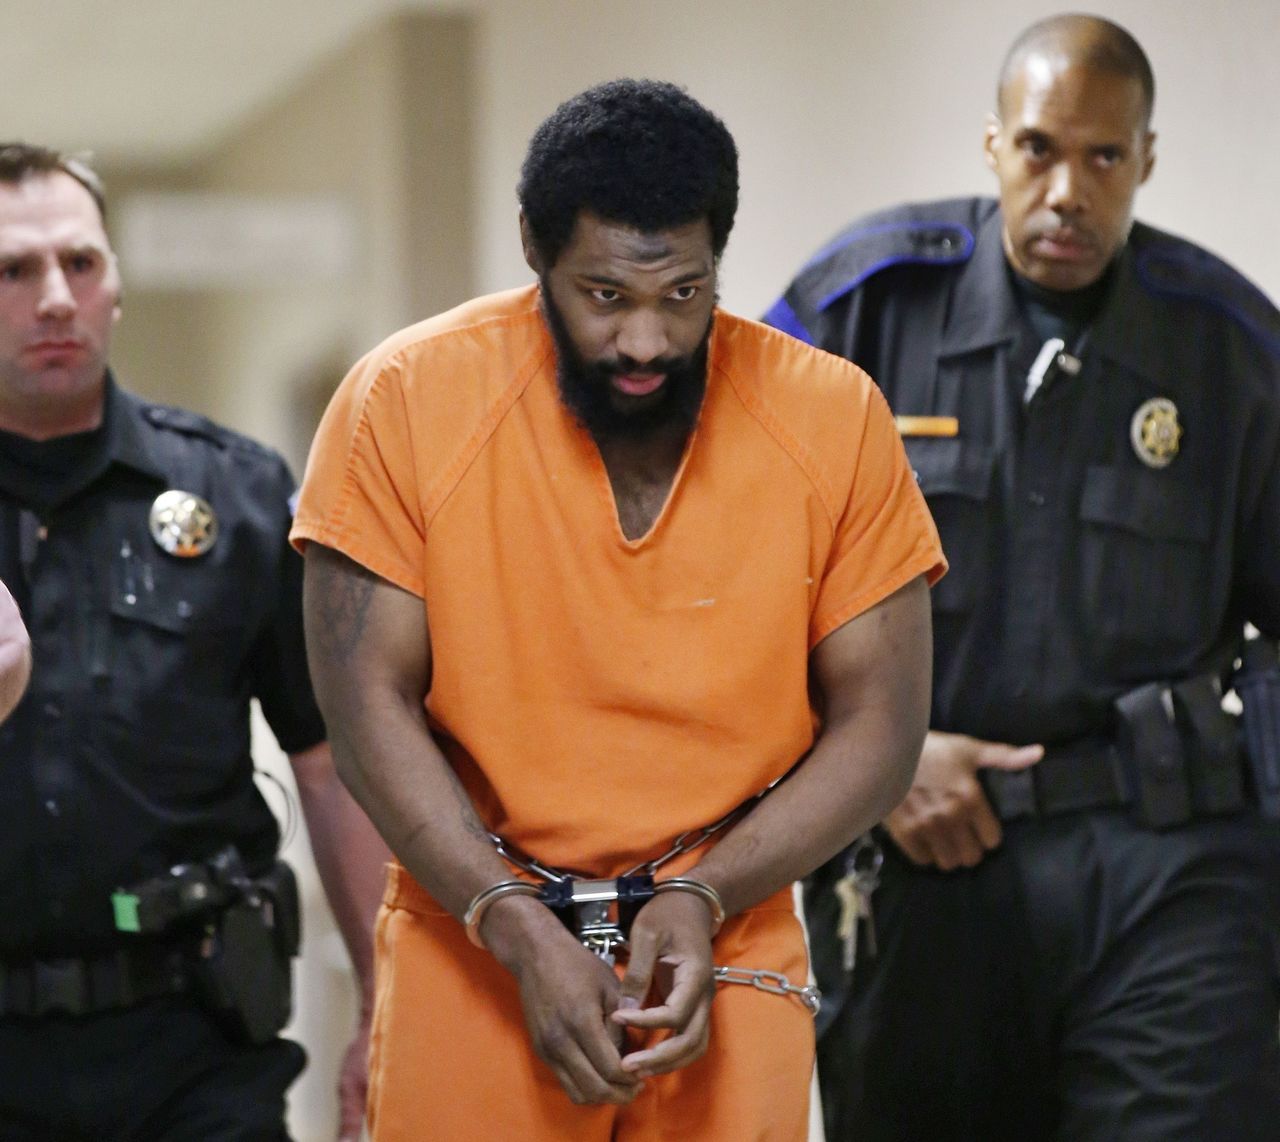 Alton Nolen is led from the courtroom following his preliminary hearing in Norman, Oklahoma, on Jan. 8.